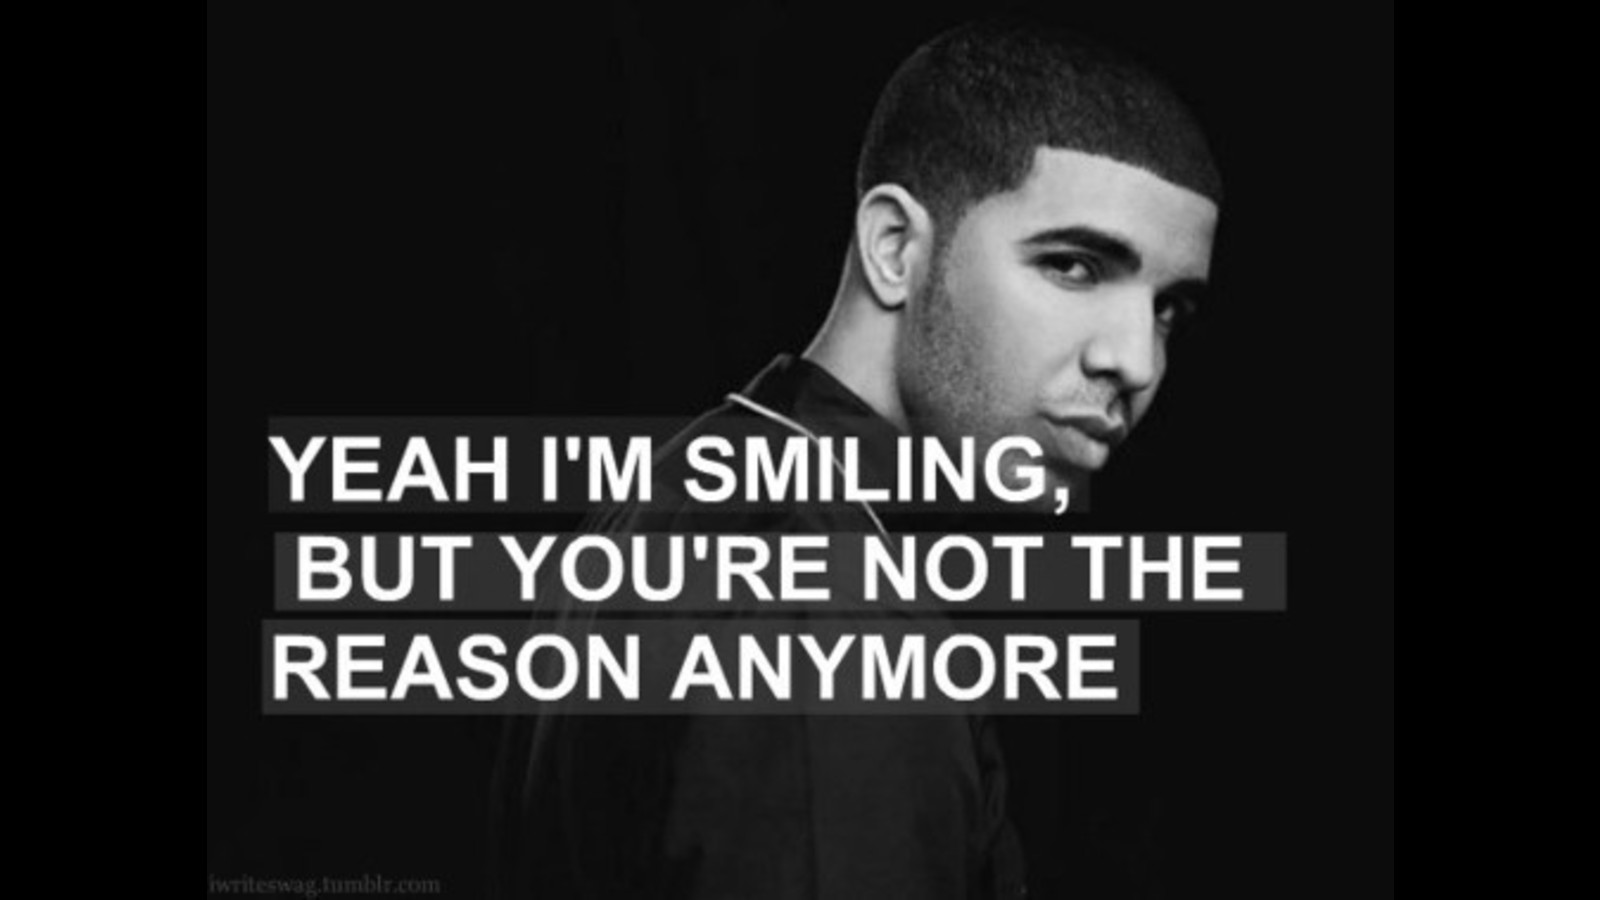 celebrity-drake-famous-quote-wallpaper-